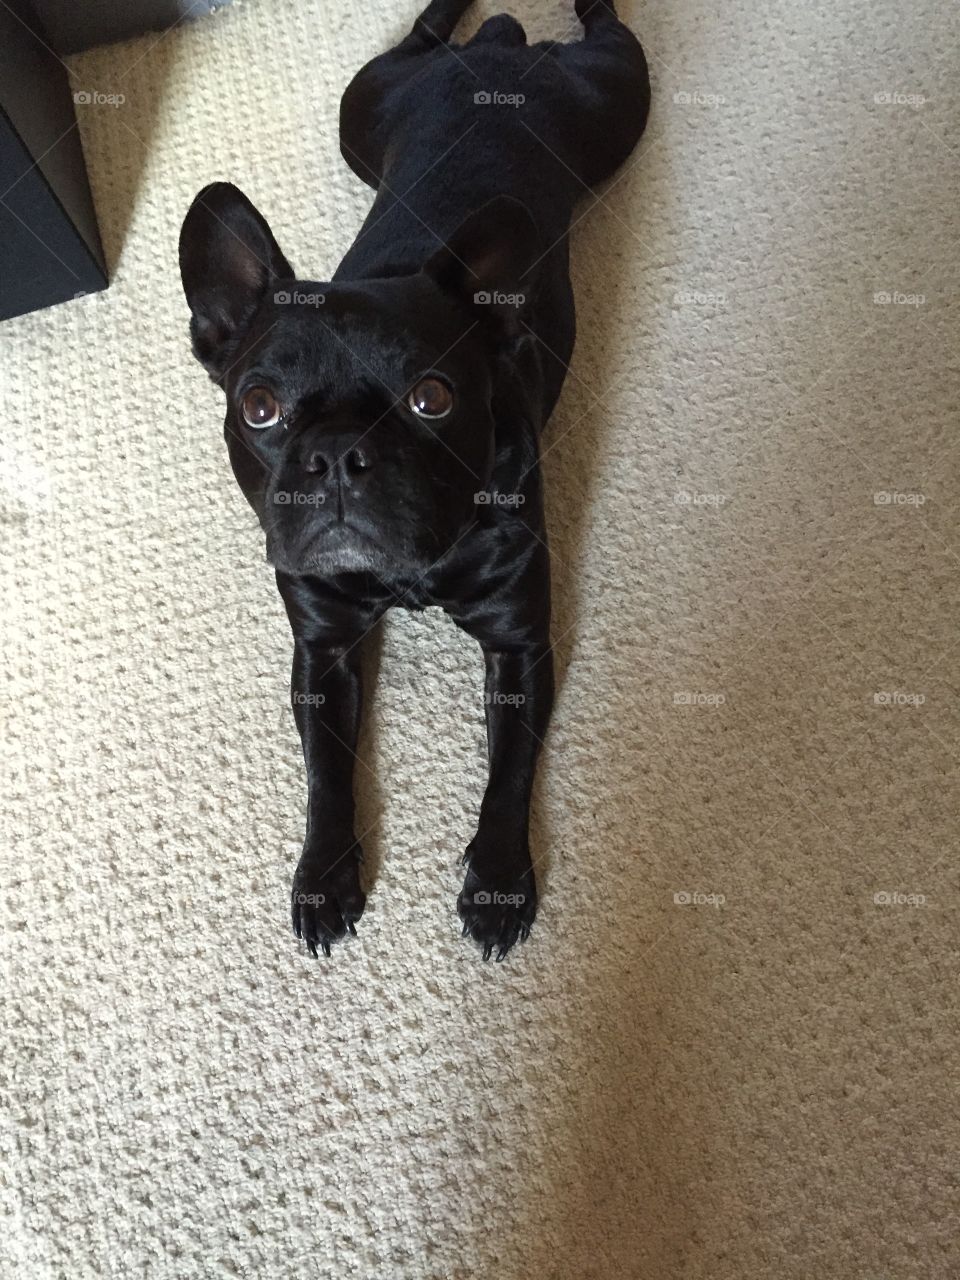 Dexter's big eyes. Funny frenchie face